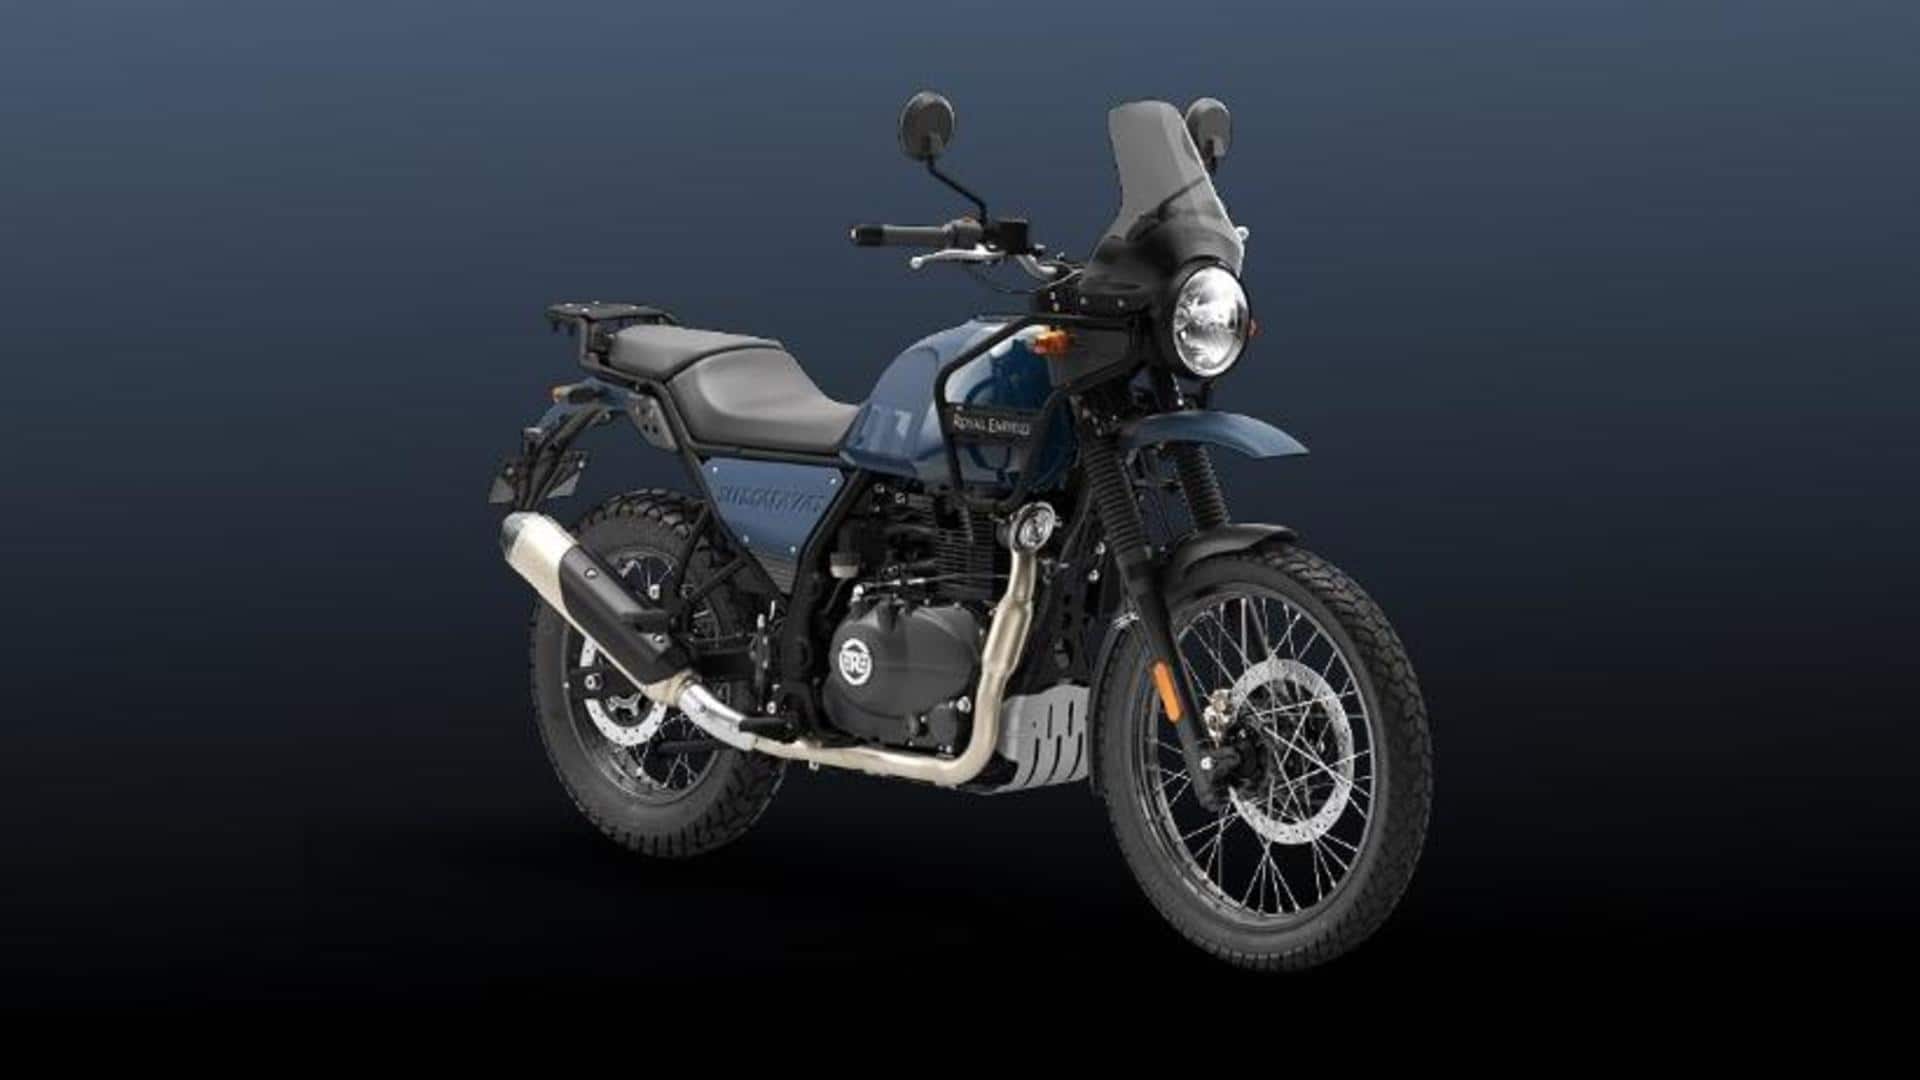 New-generation Royal Enfield Himalayan now available: Should you buy?